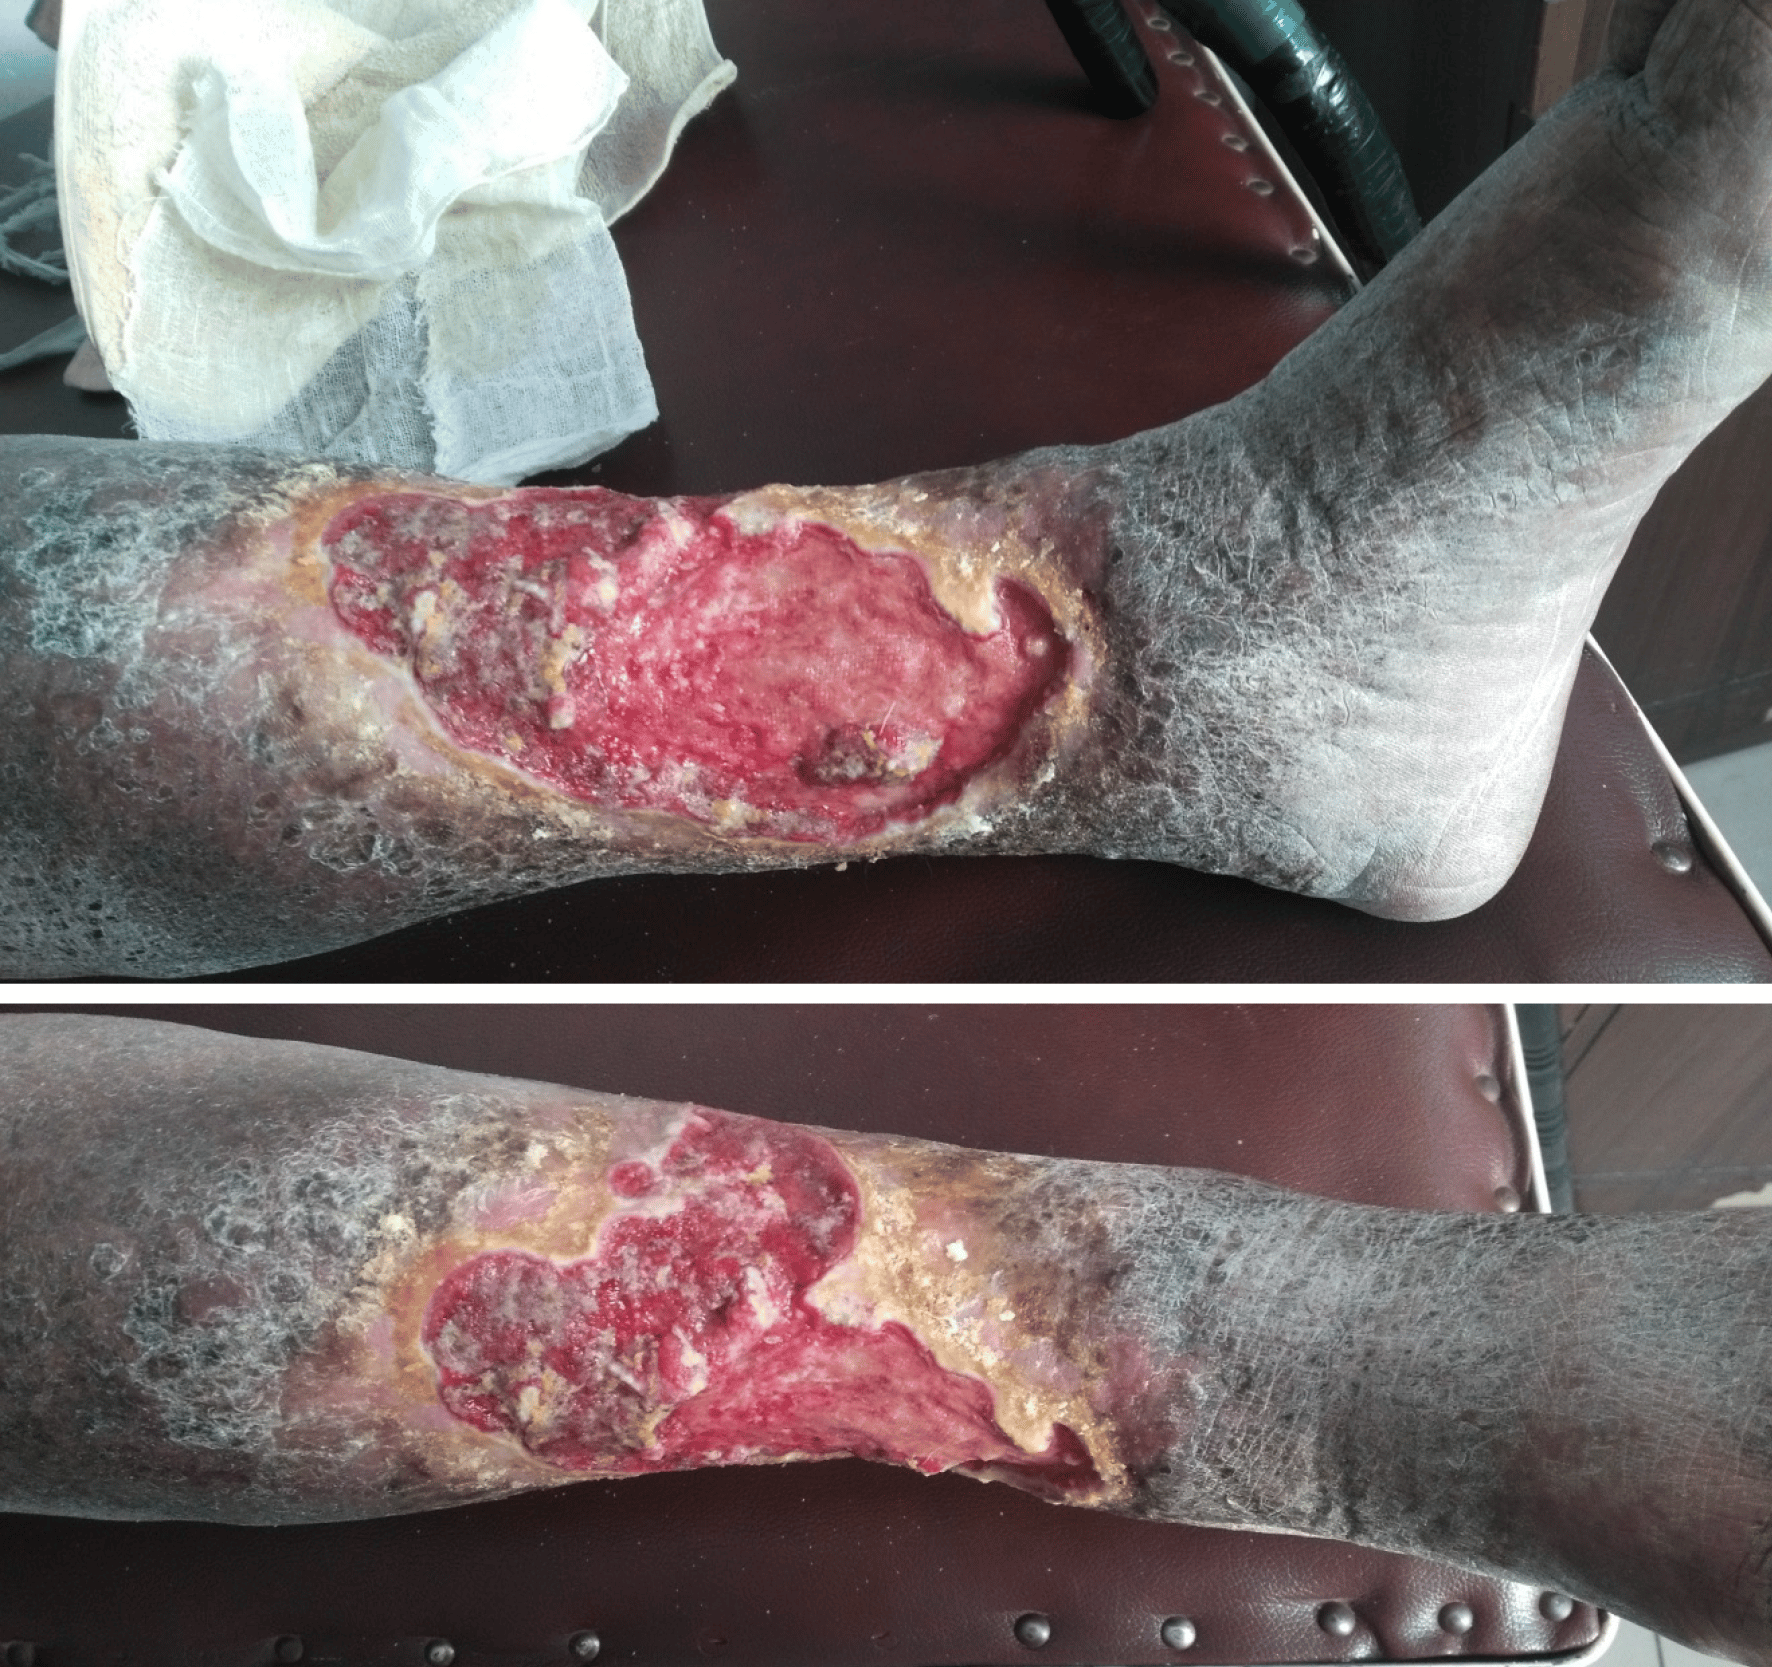 Strategies and challenges in the treatment of chronic venous leg ulcers